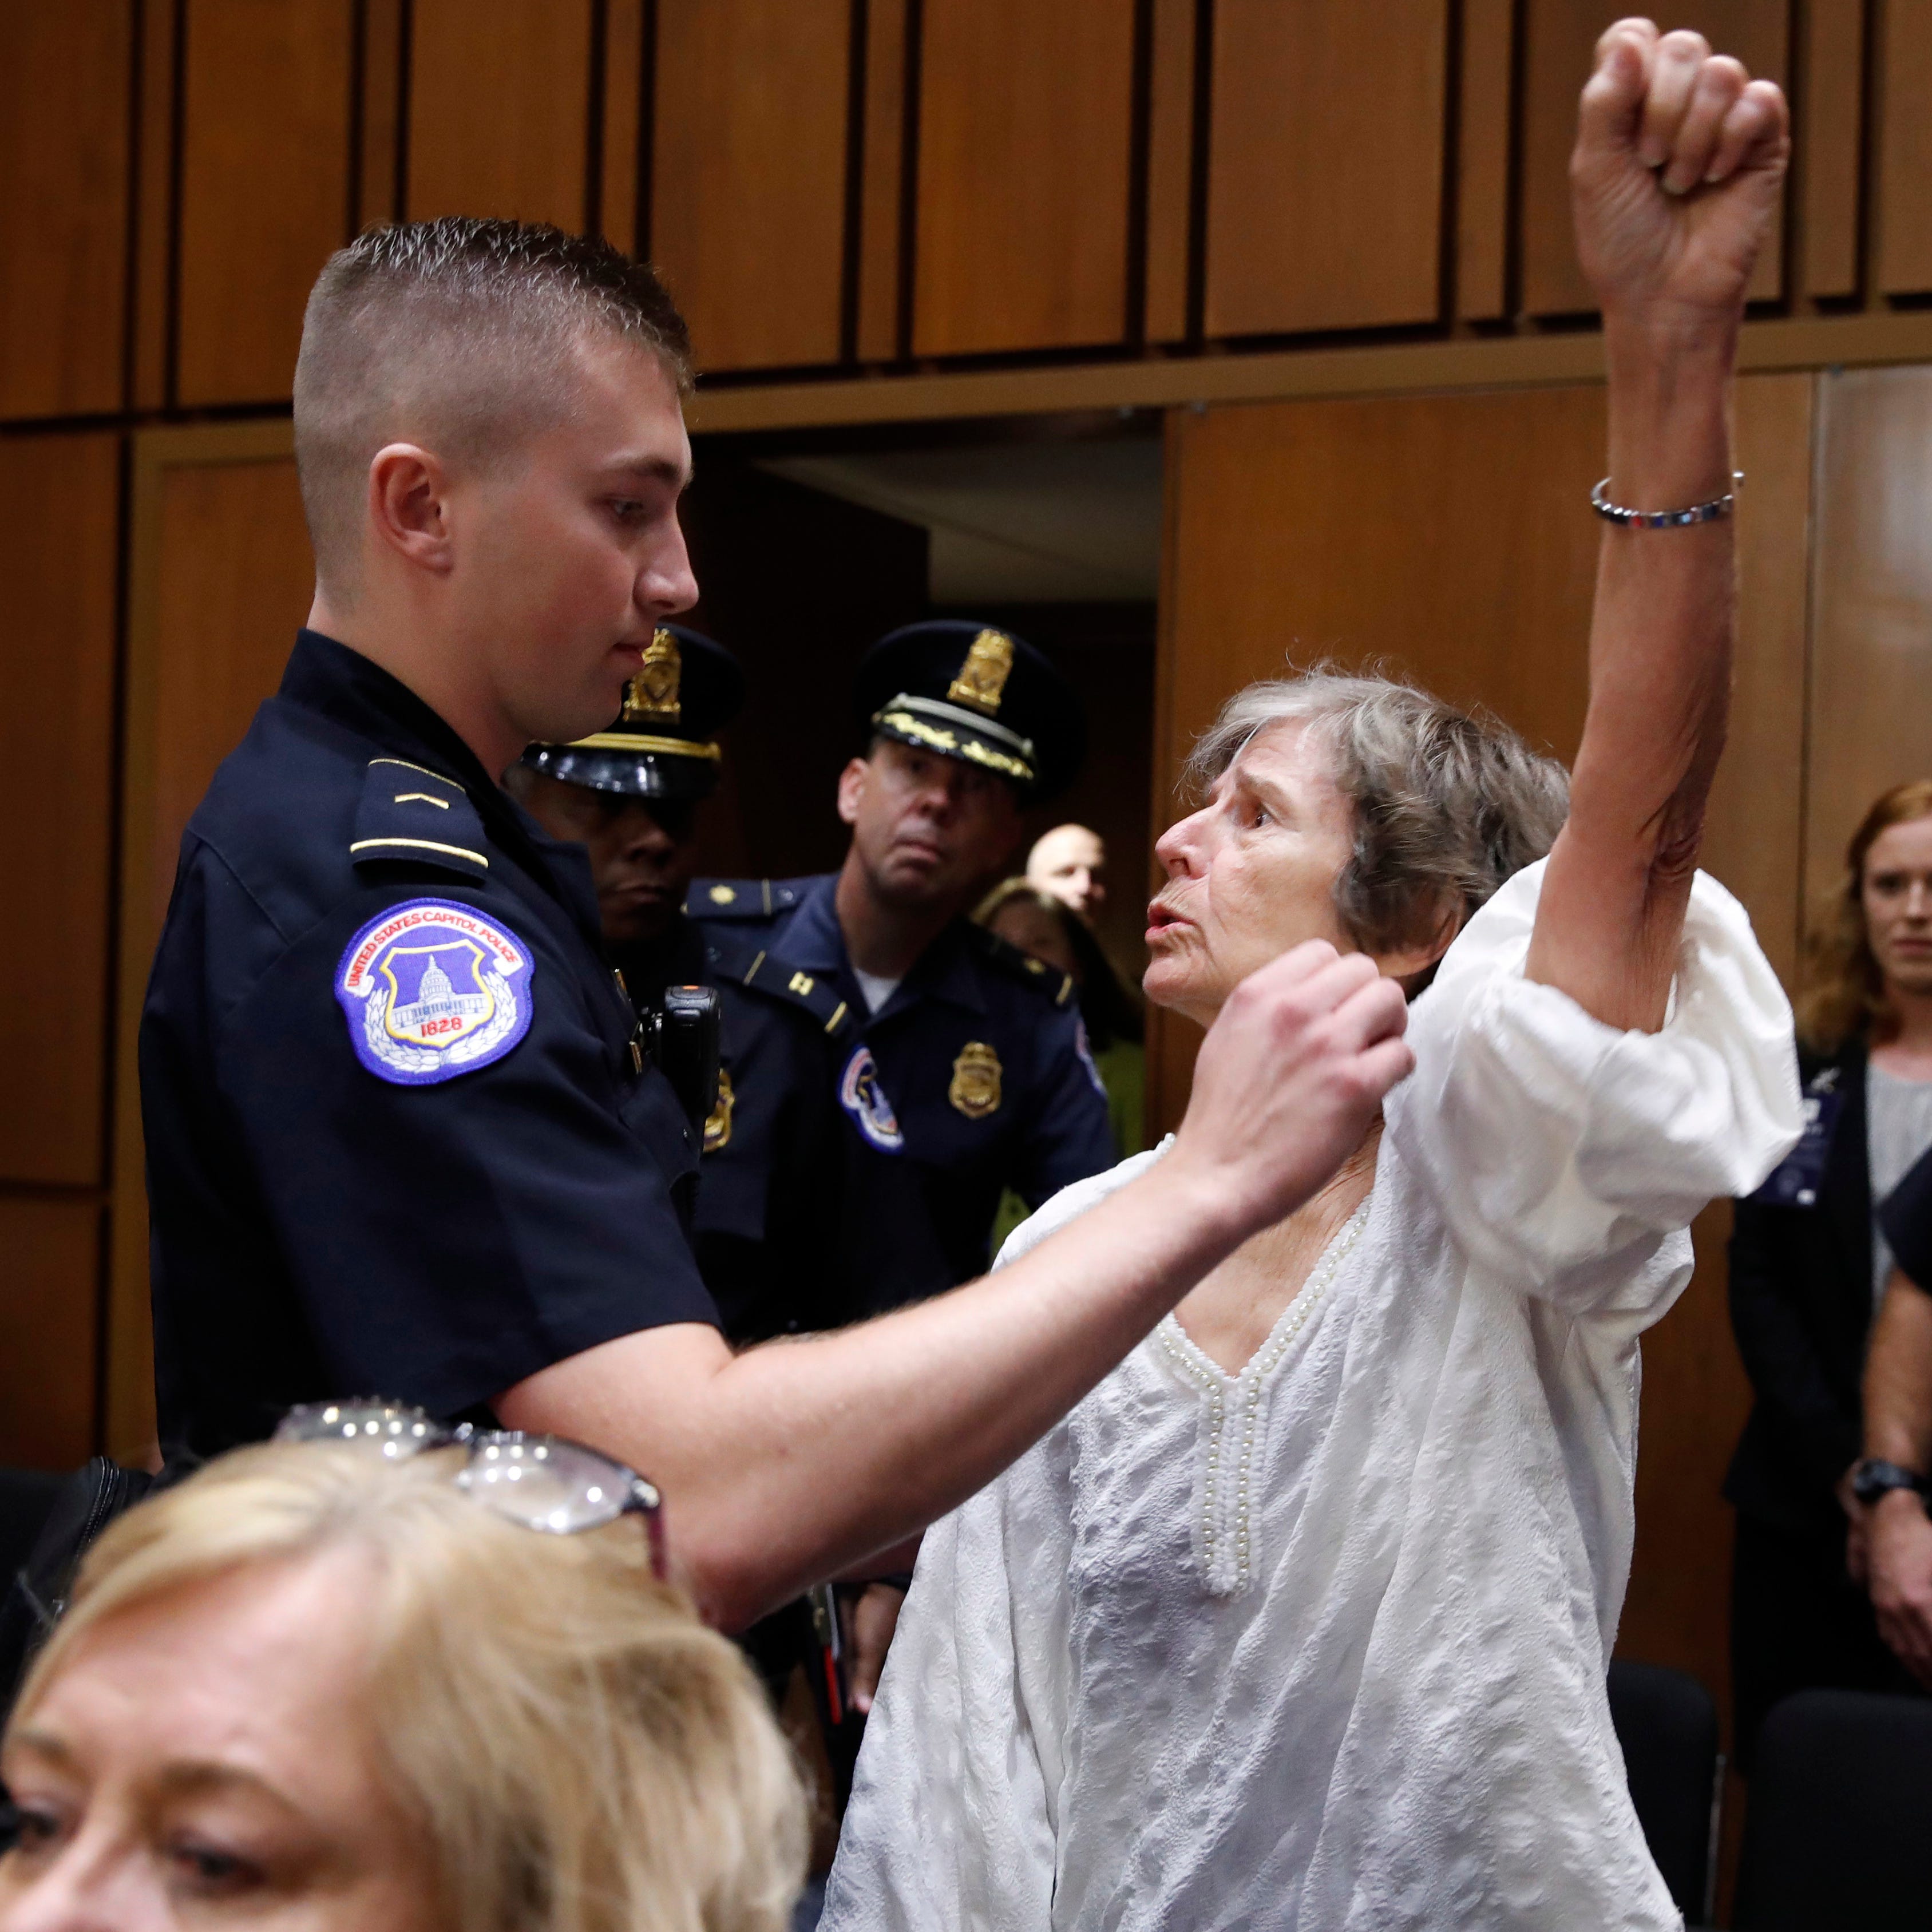 A woman stands and voices her opposition to Supreme Court nominee Brett Kavanaugh, during a Senate Judiciary Committee confirmation hearing on his nomination for Supreme Court, on Capitol Hill, Tuesday, Sept. 4, 2018, in Washington.  (AP Photo/Jacque